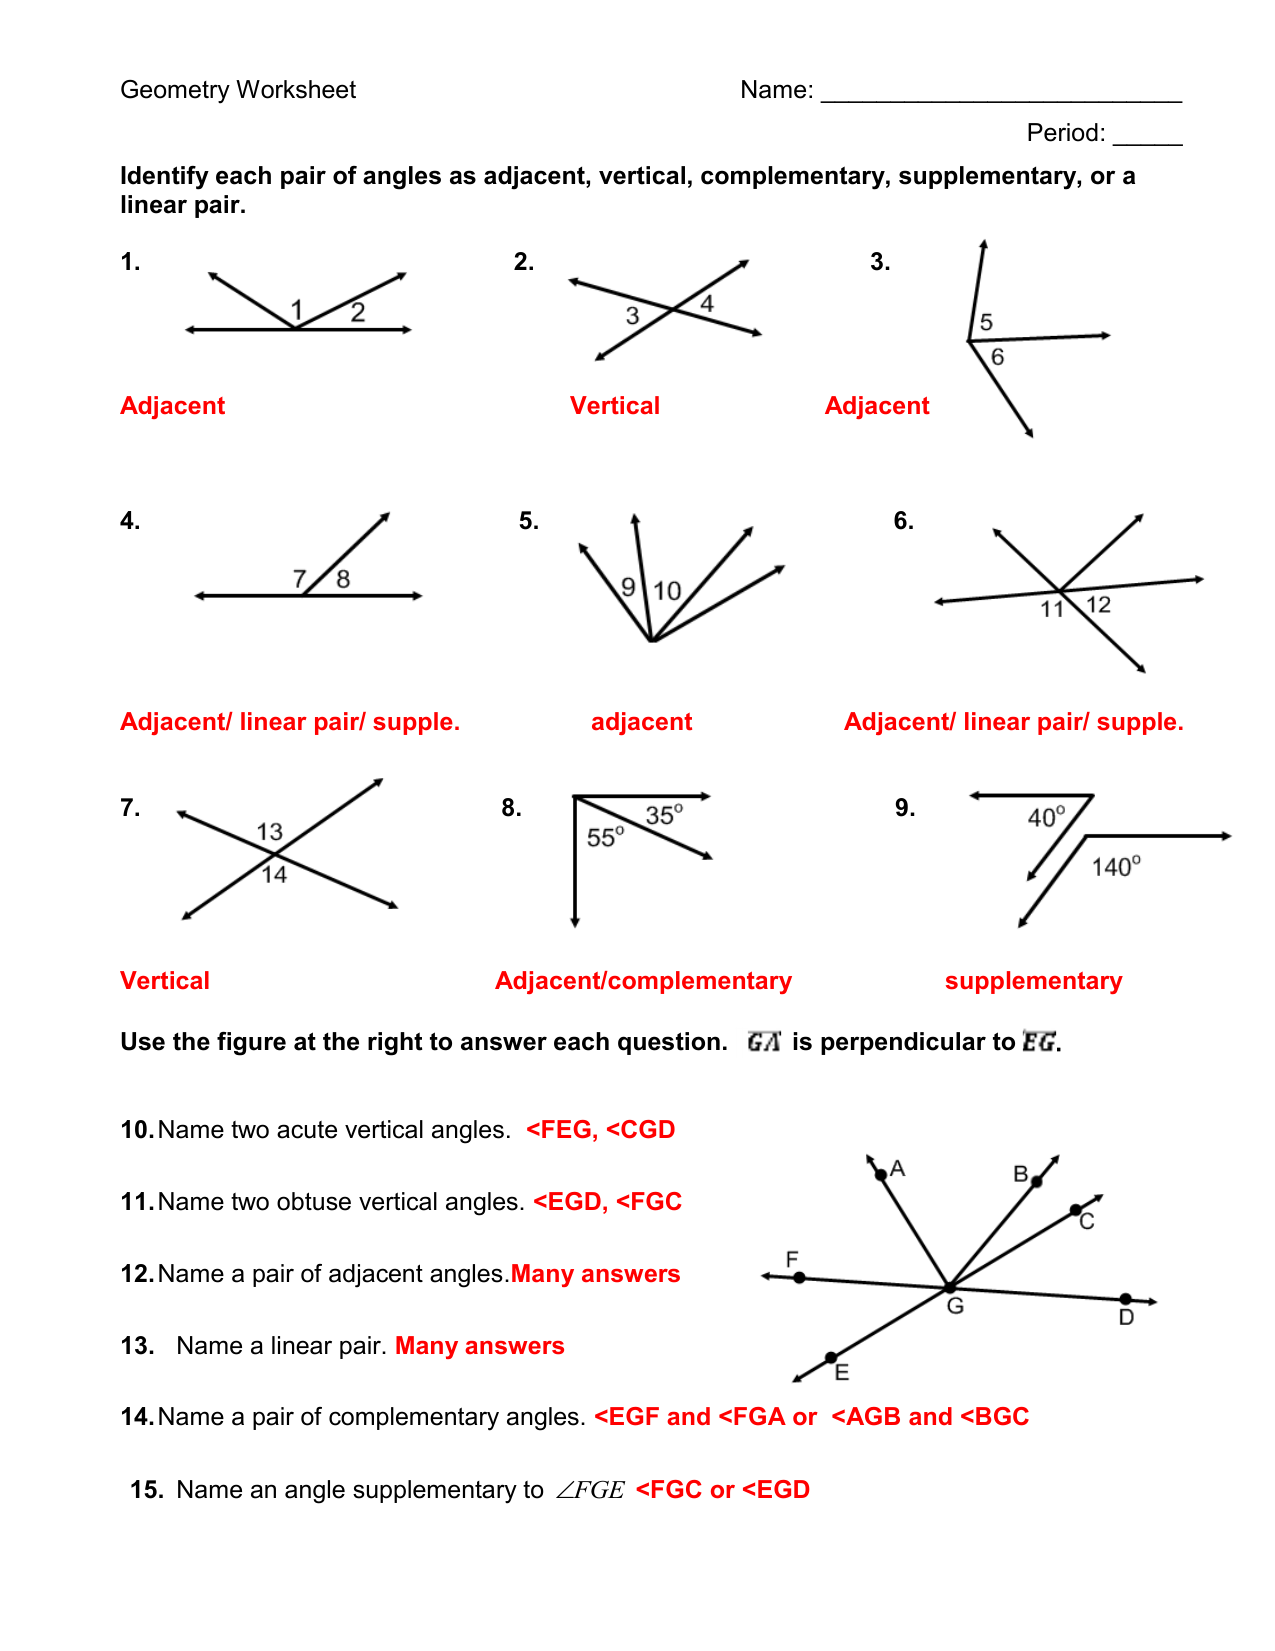 Pairs Of Angles Worksheet Answers - Nidecmege In Pairs Of Angles Worksheet Answers